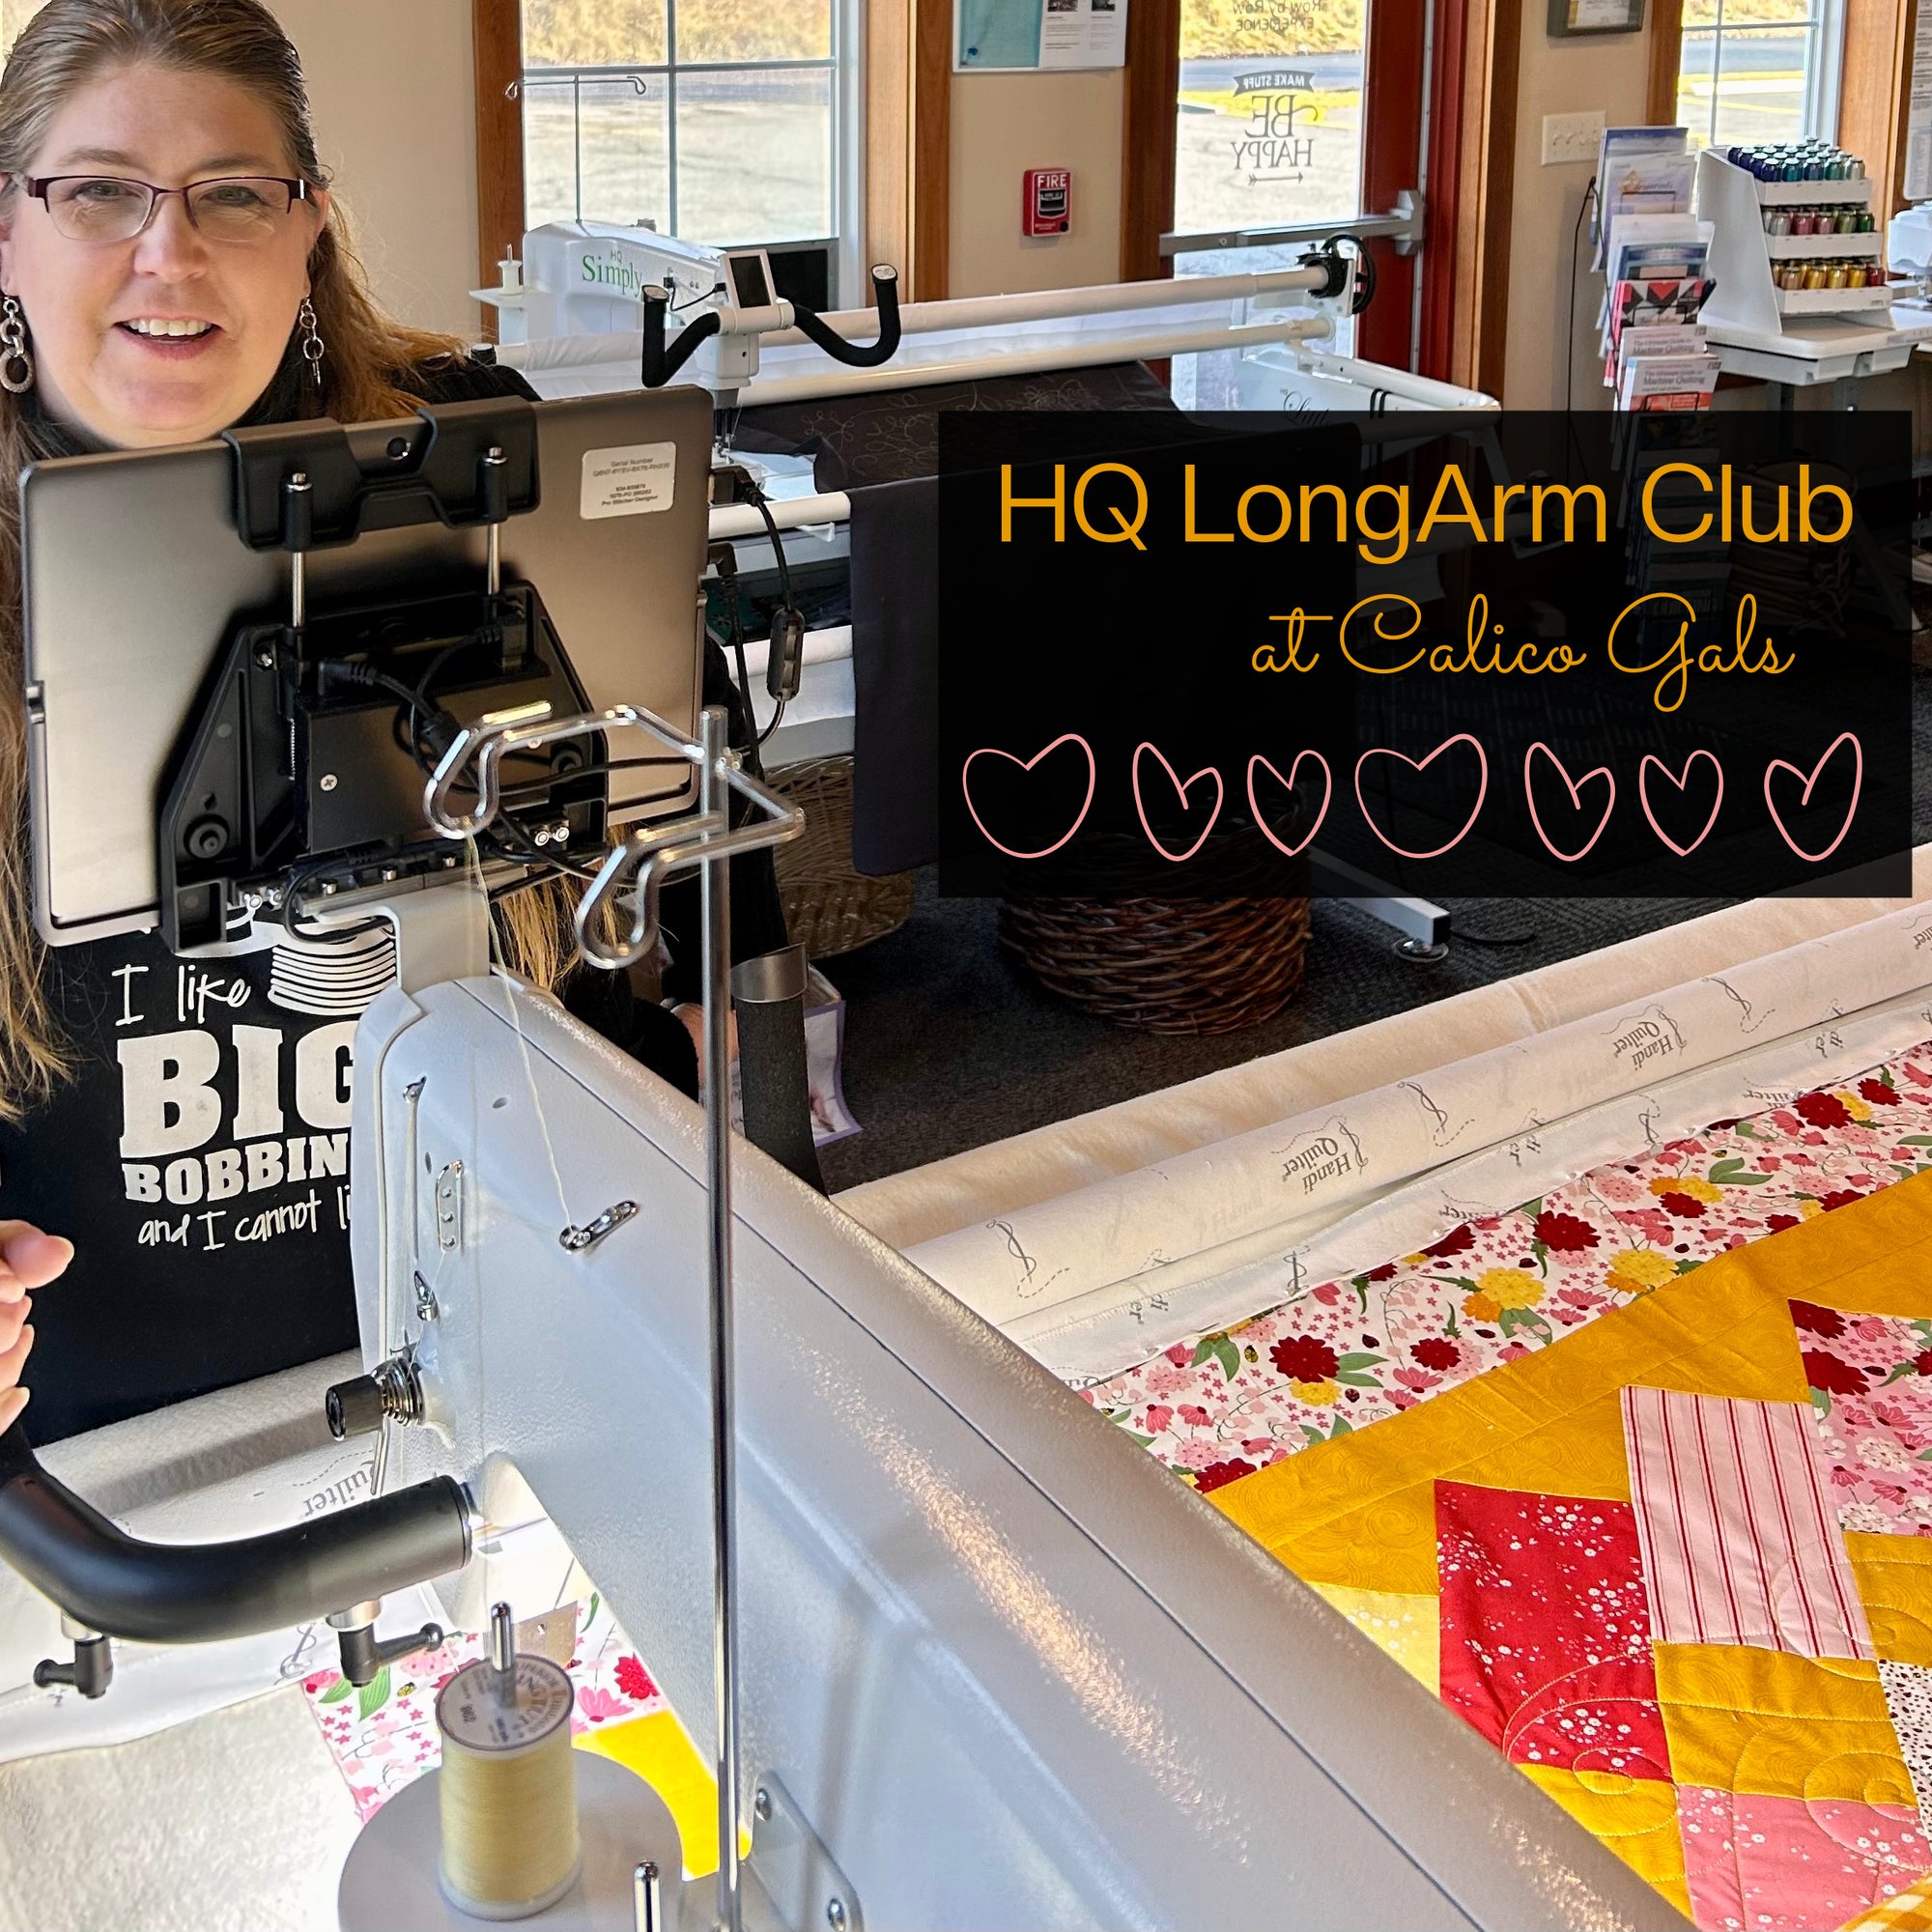 LONG ARM CLUB MAY 6 5:30 - 7:30  WITH DARYL AND CINDY